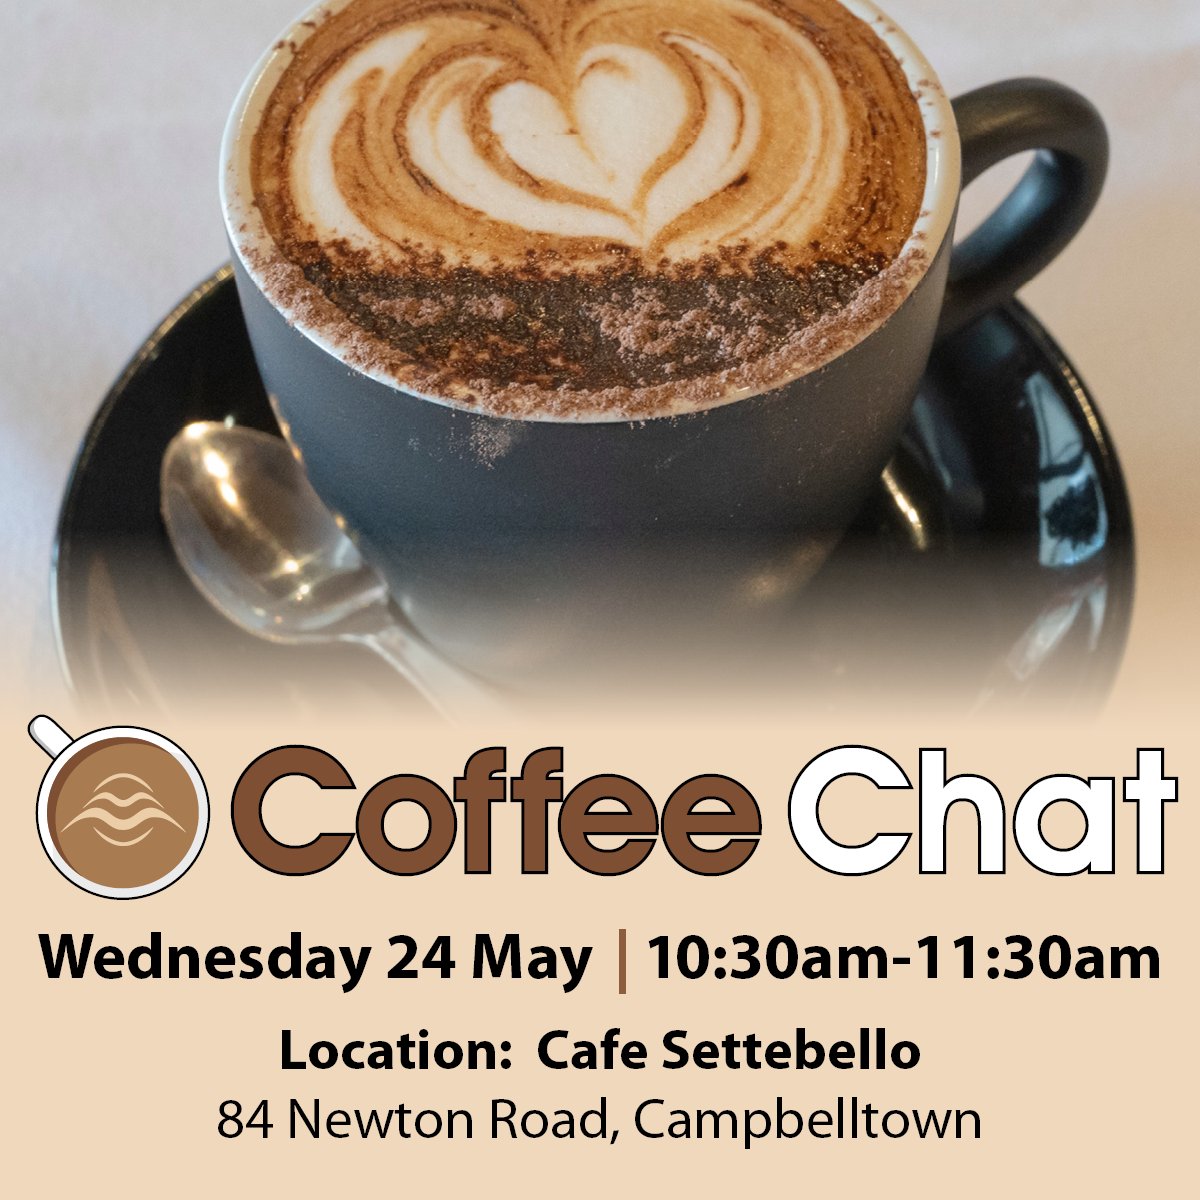 Join us for Coffee Chat tomorrow, Wednesday 24 May, 10:30am - 11:30am at Cafe Settebello.

Come along and chat to Staff about your ideas, suggestions or concerns over a cuppa. 

We hope to see you there!